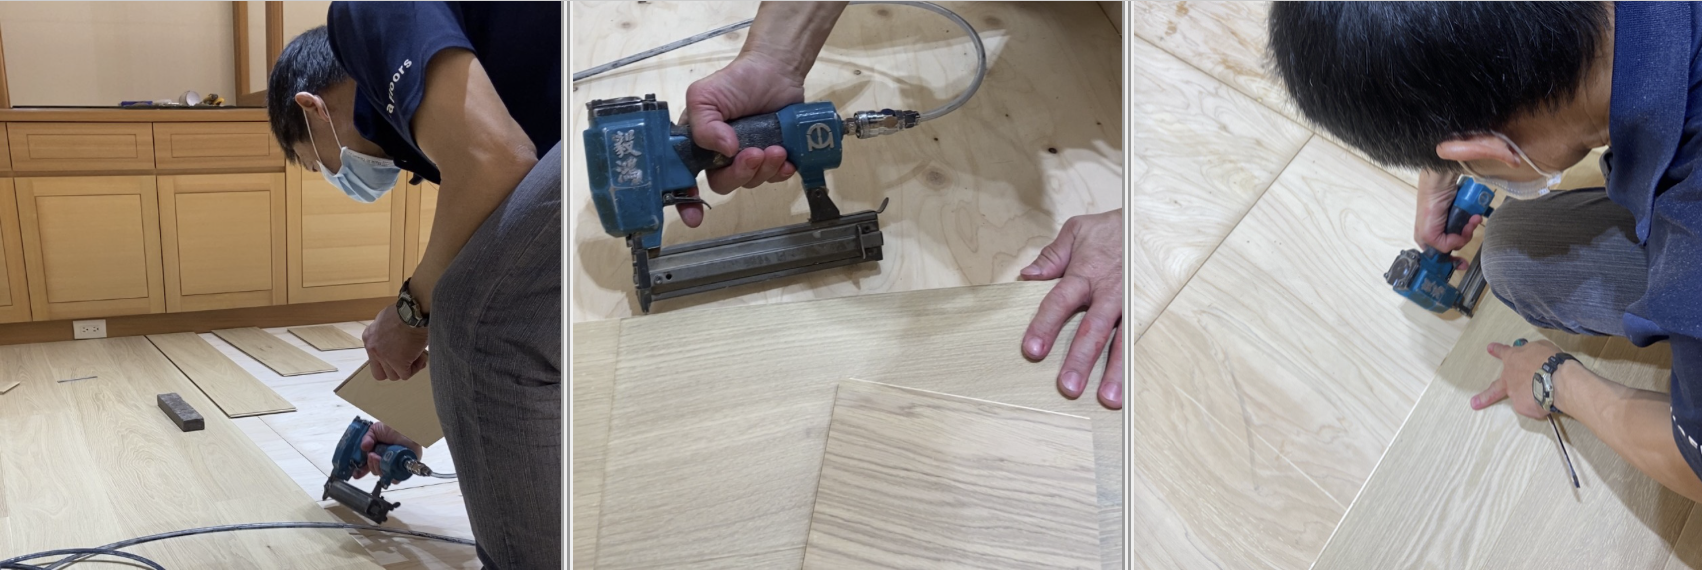 How to sand floorboards | Better Homes and Gardens